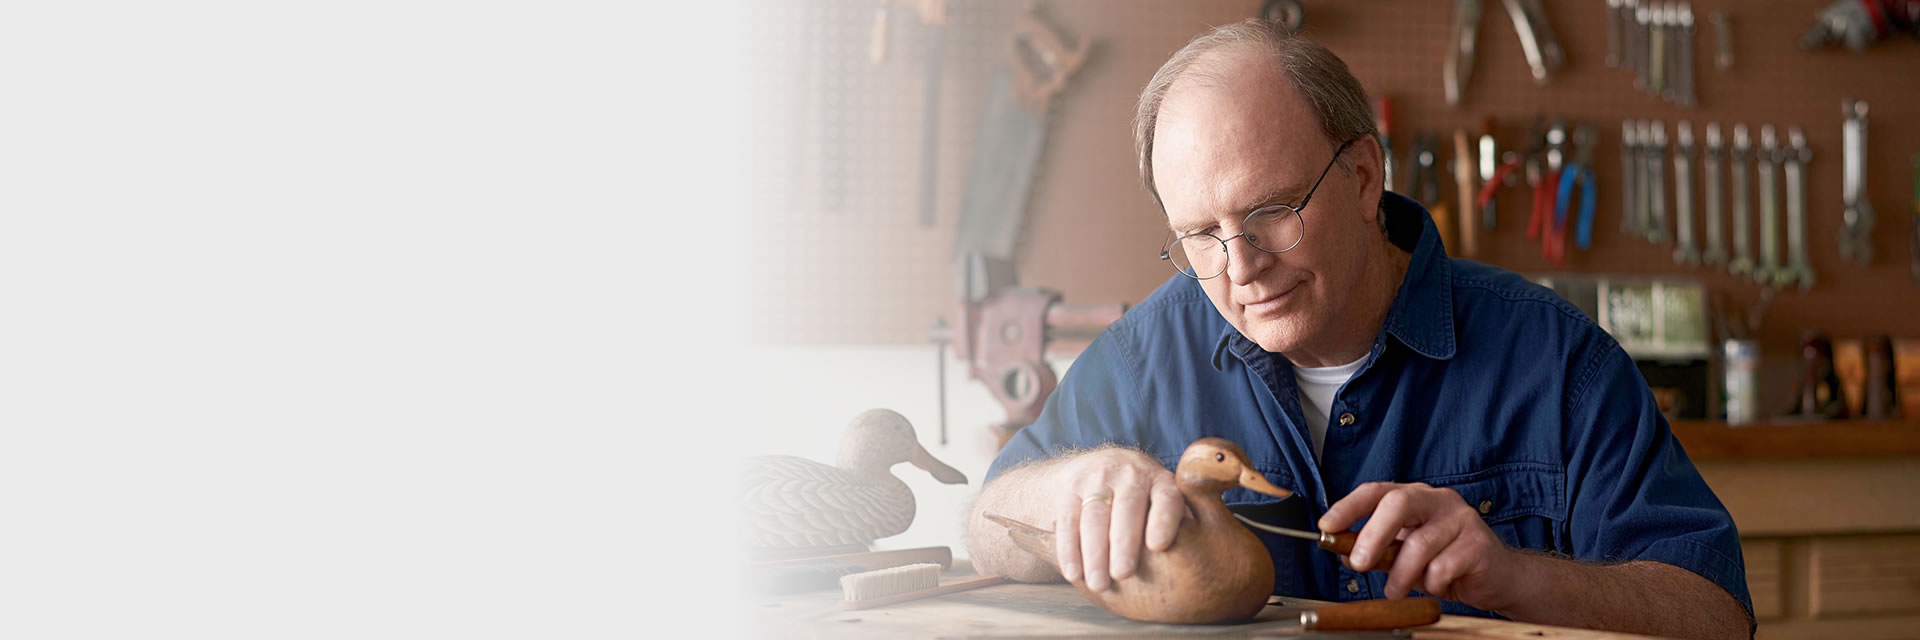 Man carving wooden duck